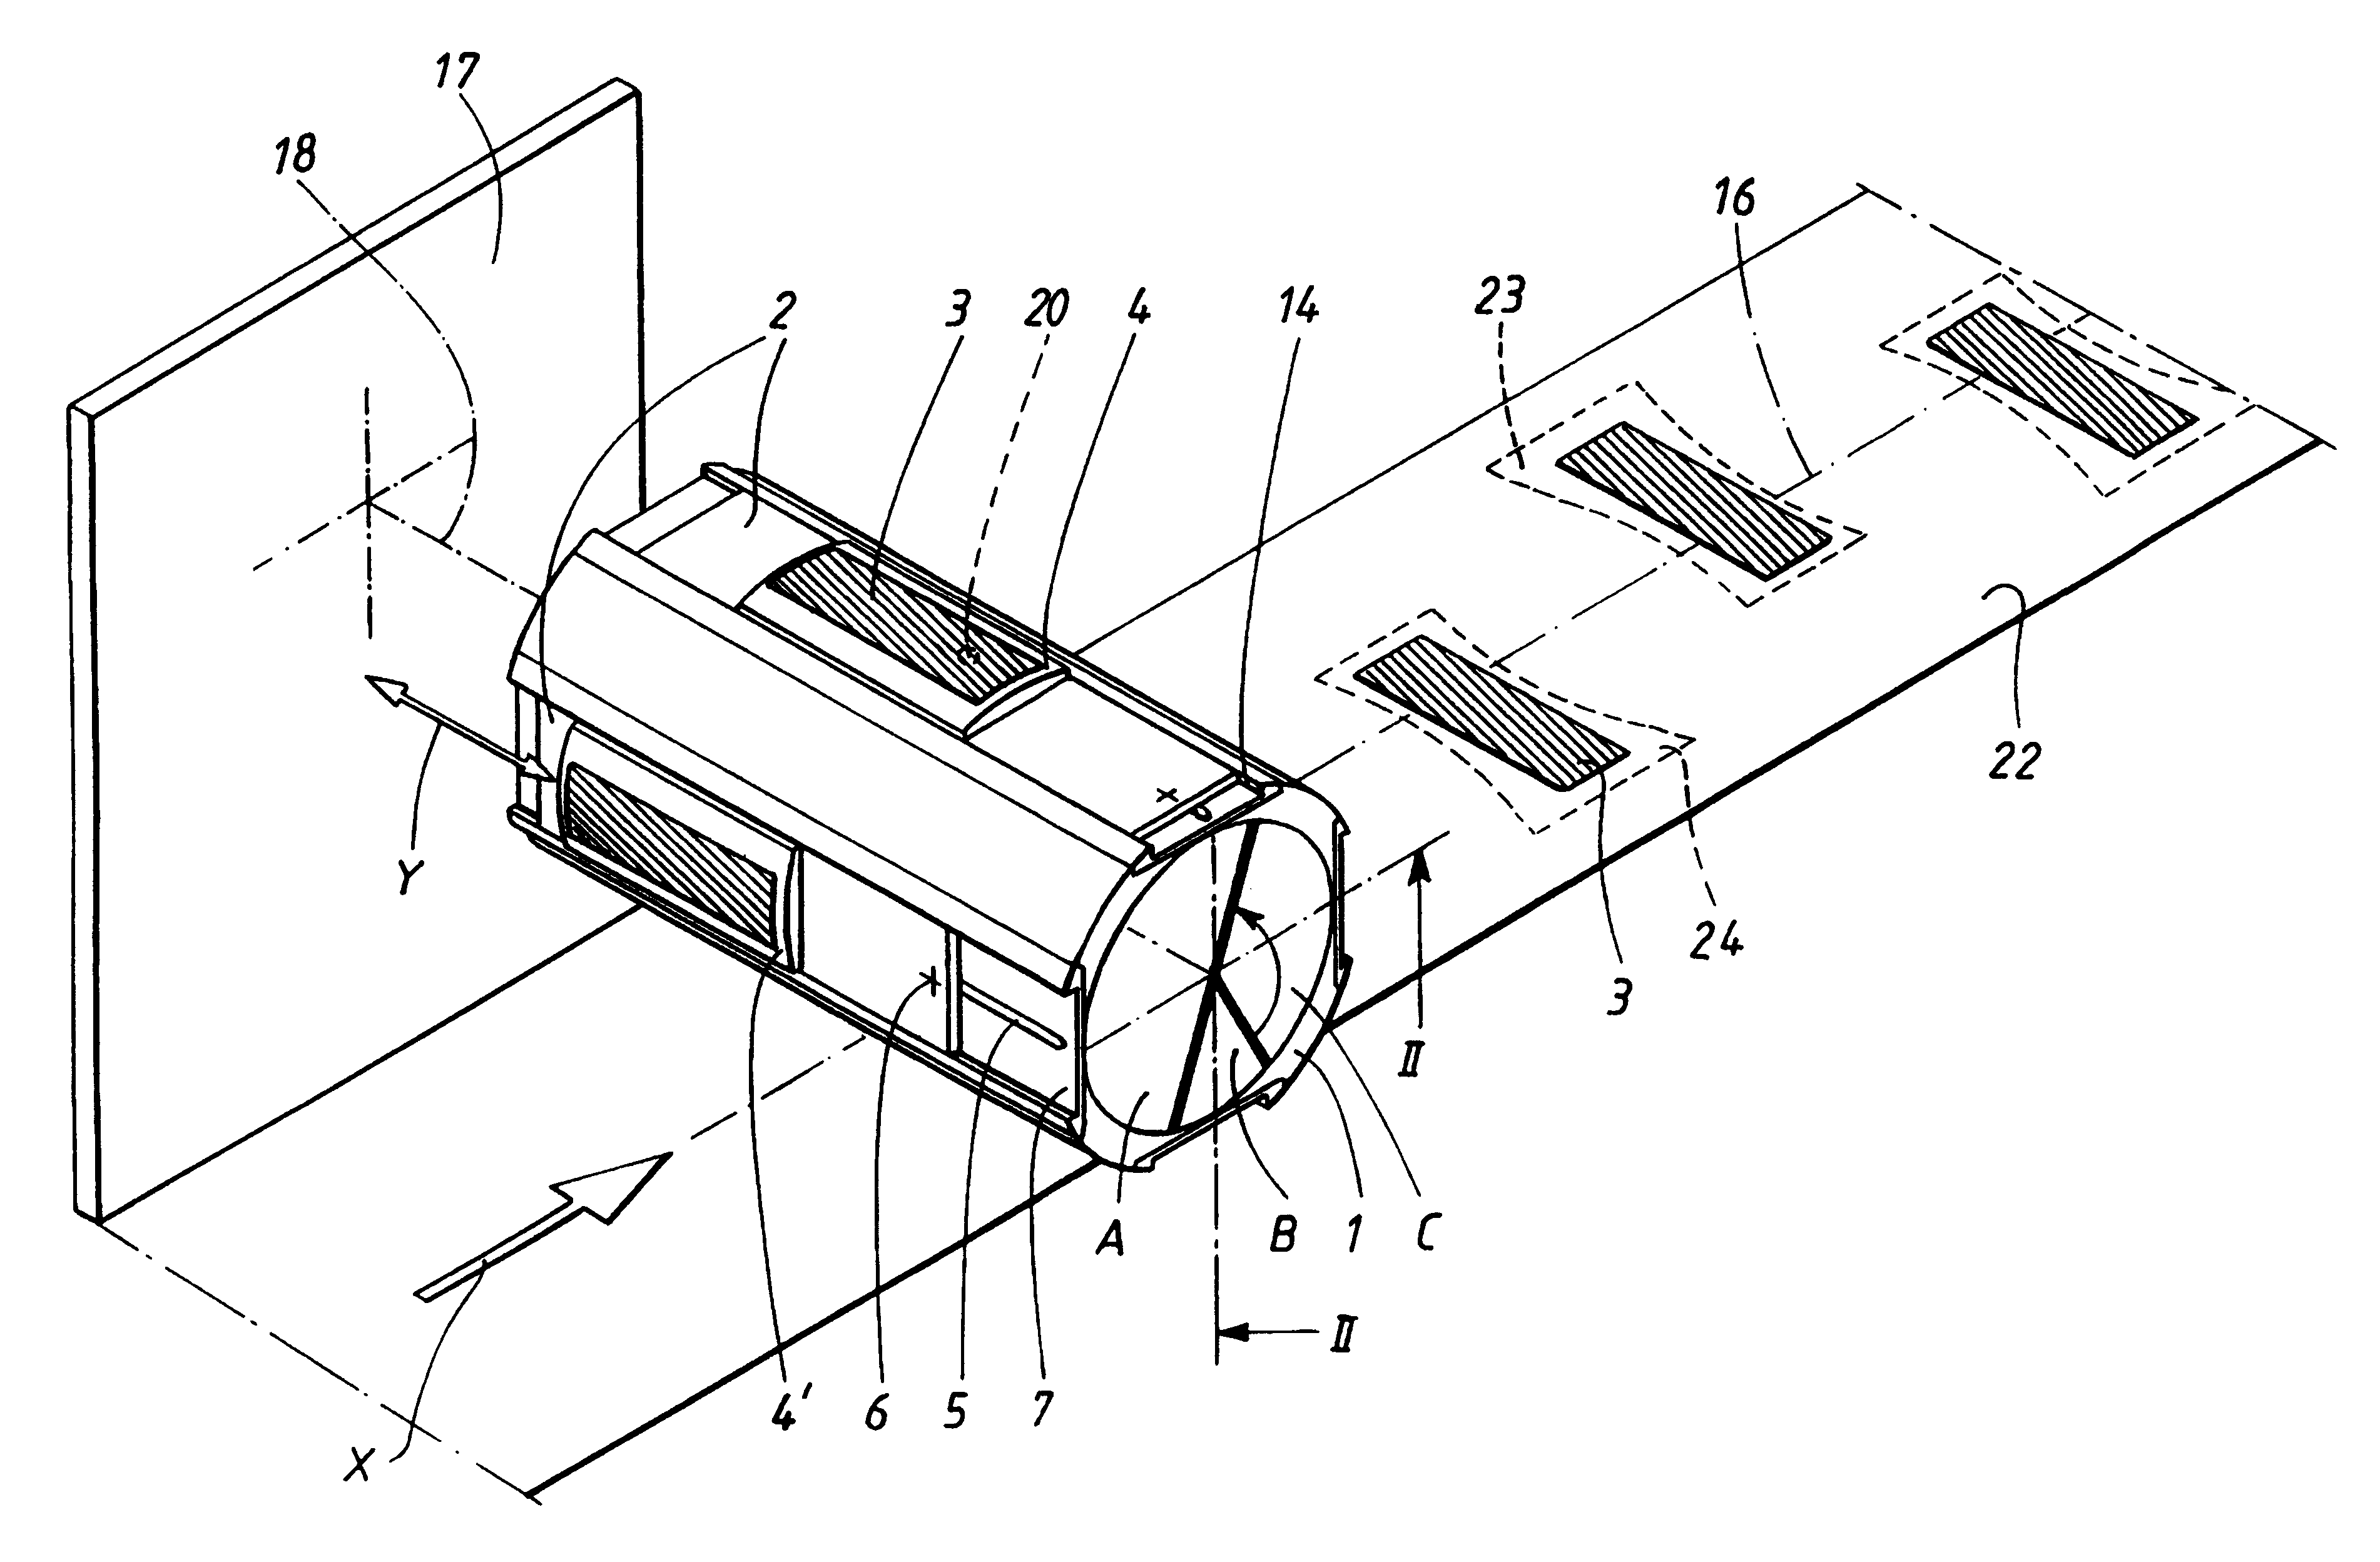 Application drum for use in the production of absorbent articles